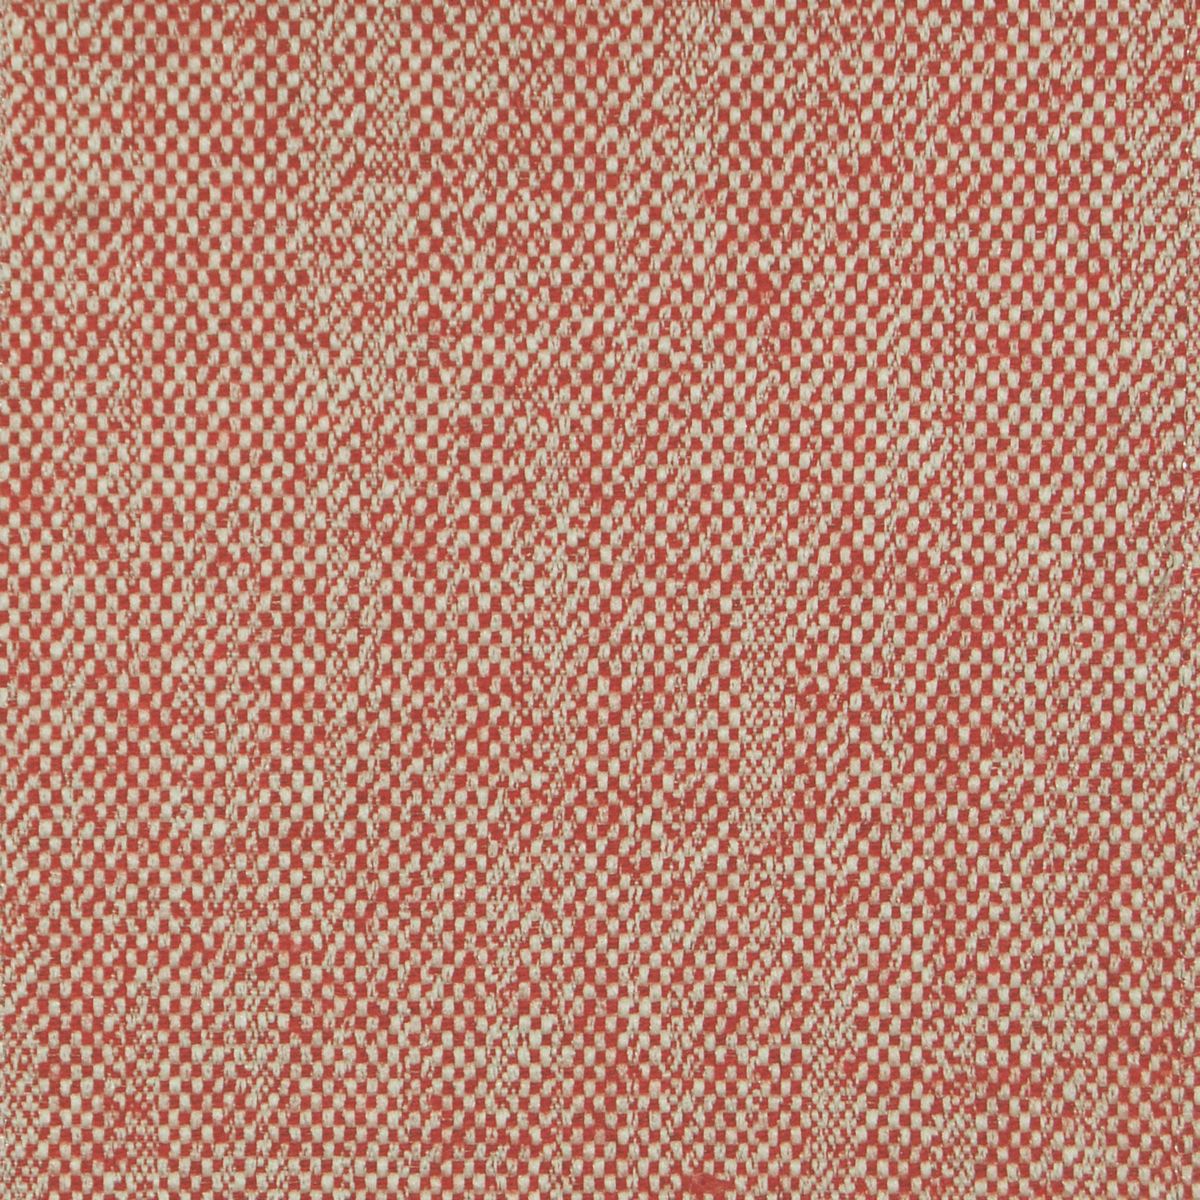 Selkirk Autumn Fabric by Voyage Maison